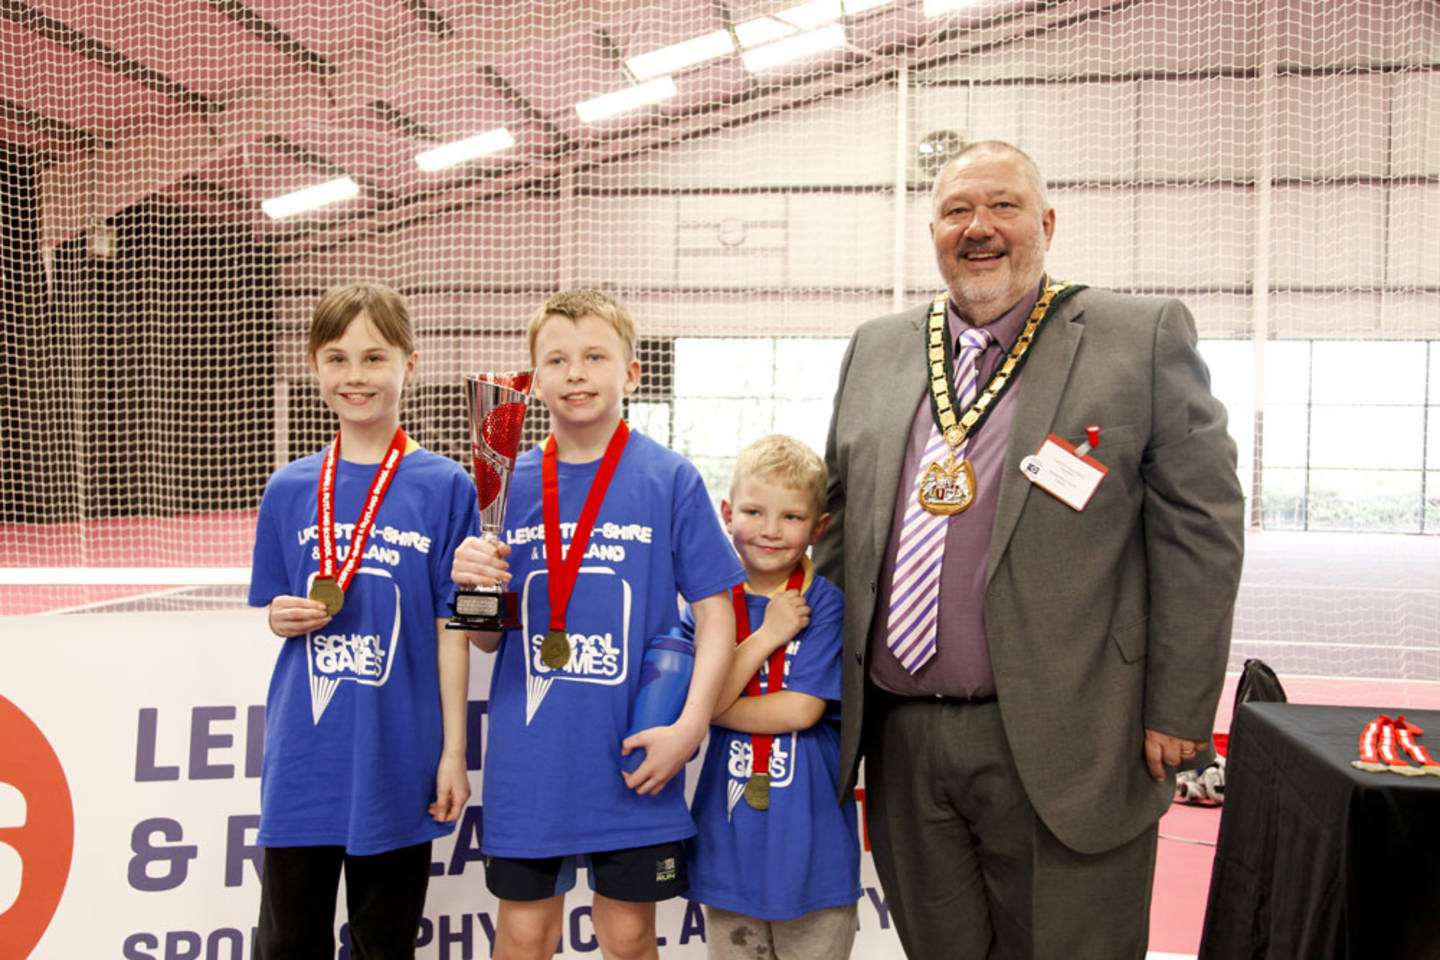 Kurling Winners Melton & Belvoir with Ozzy O'Shea, Leicestershire County Council Chairman